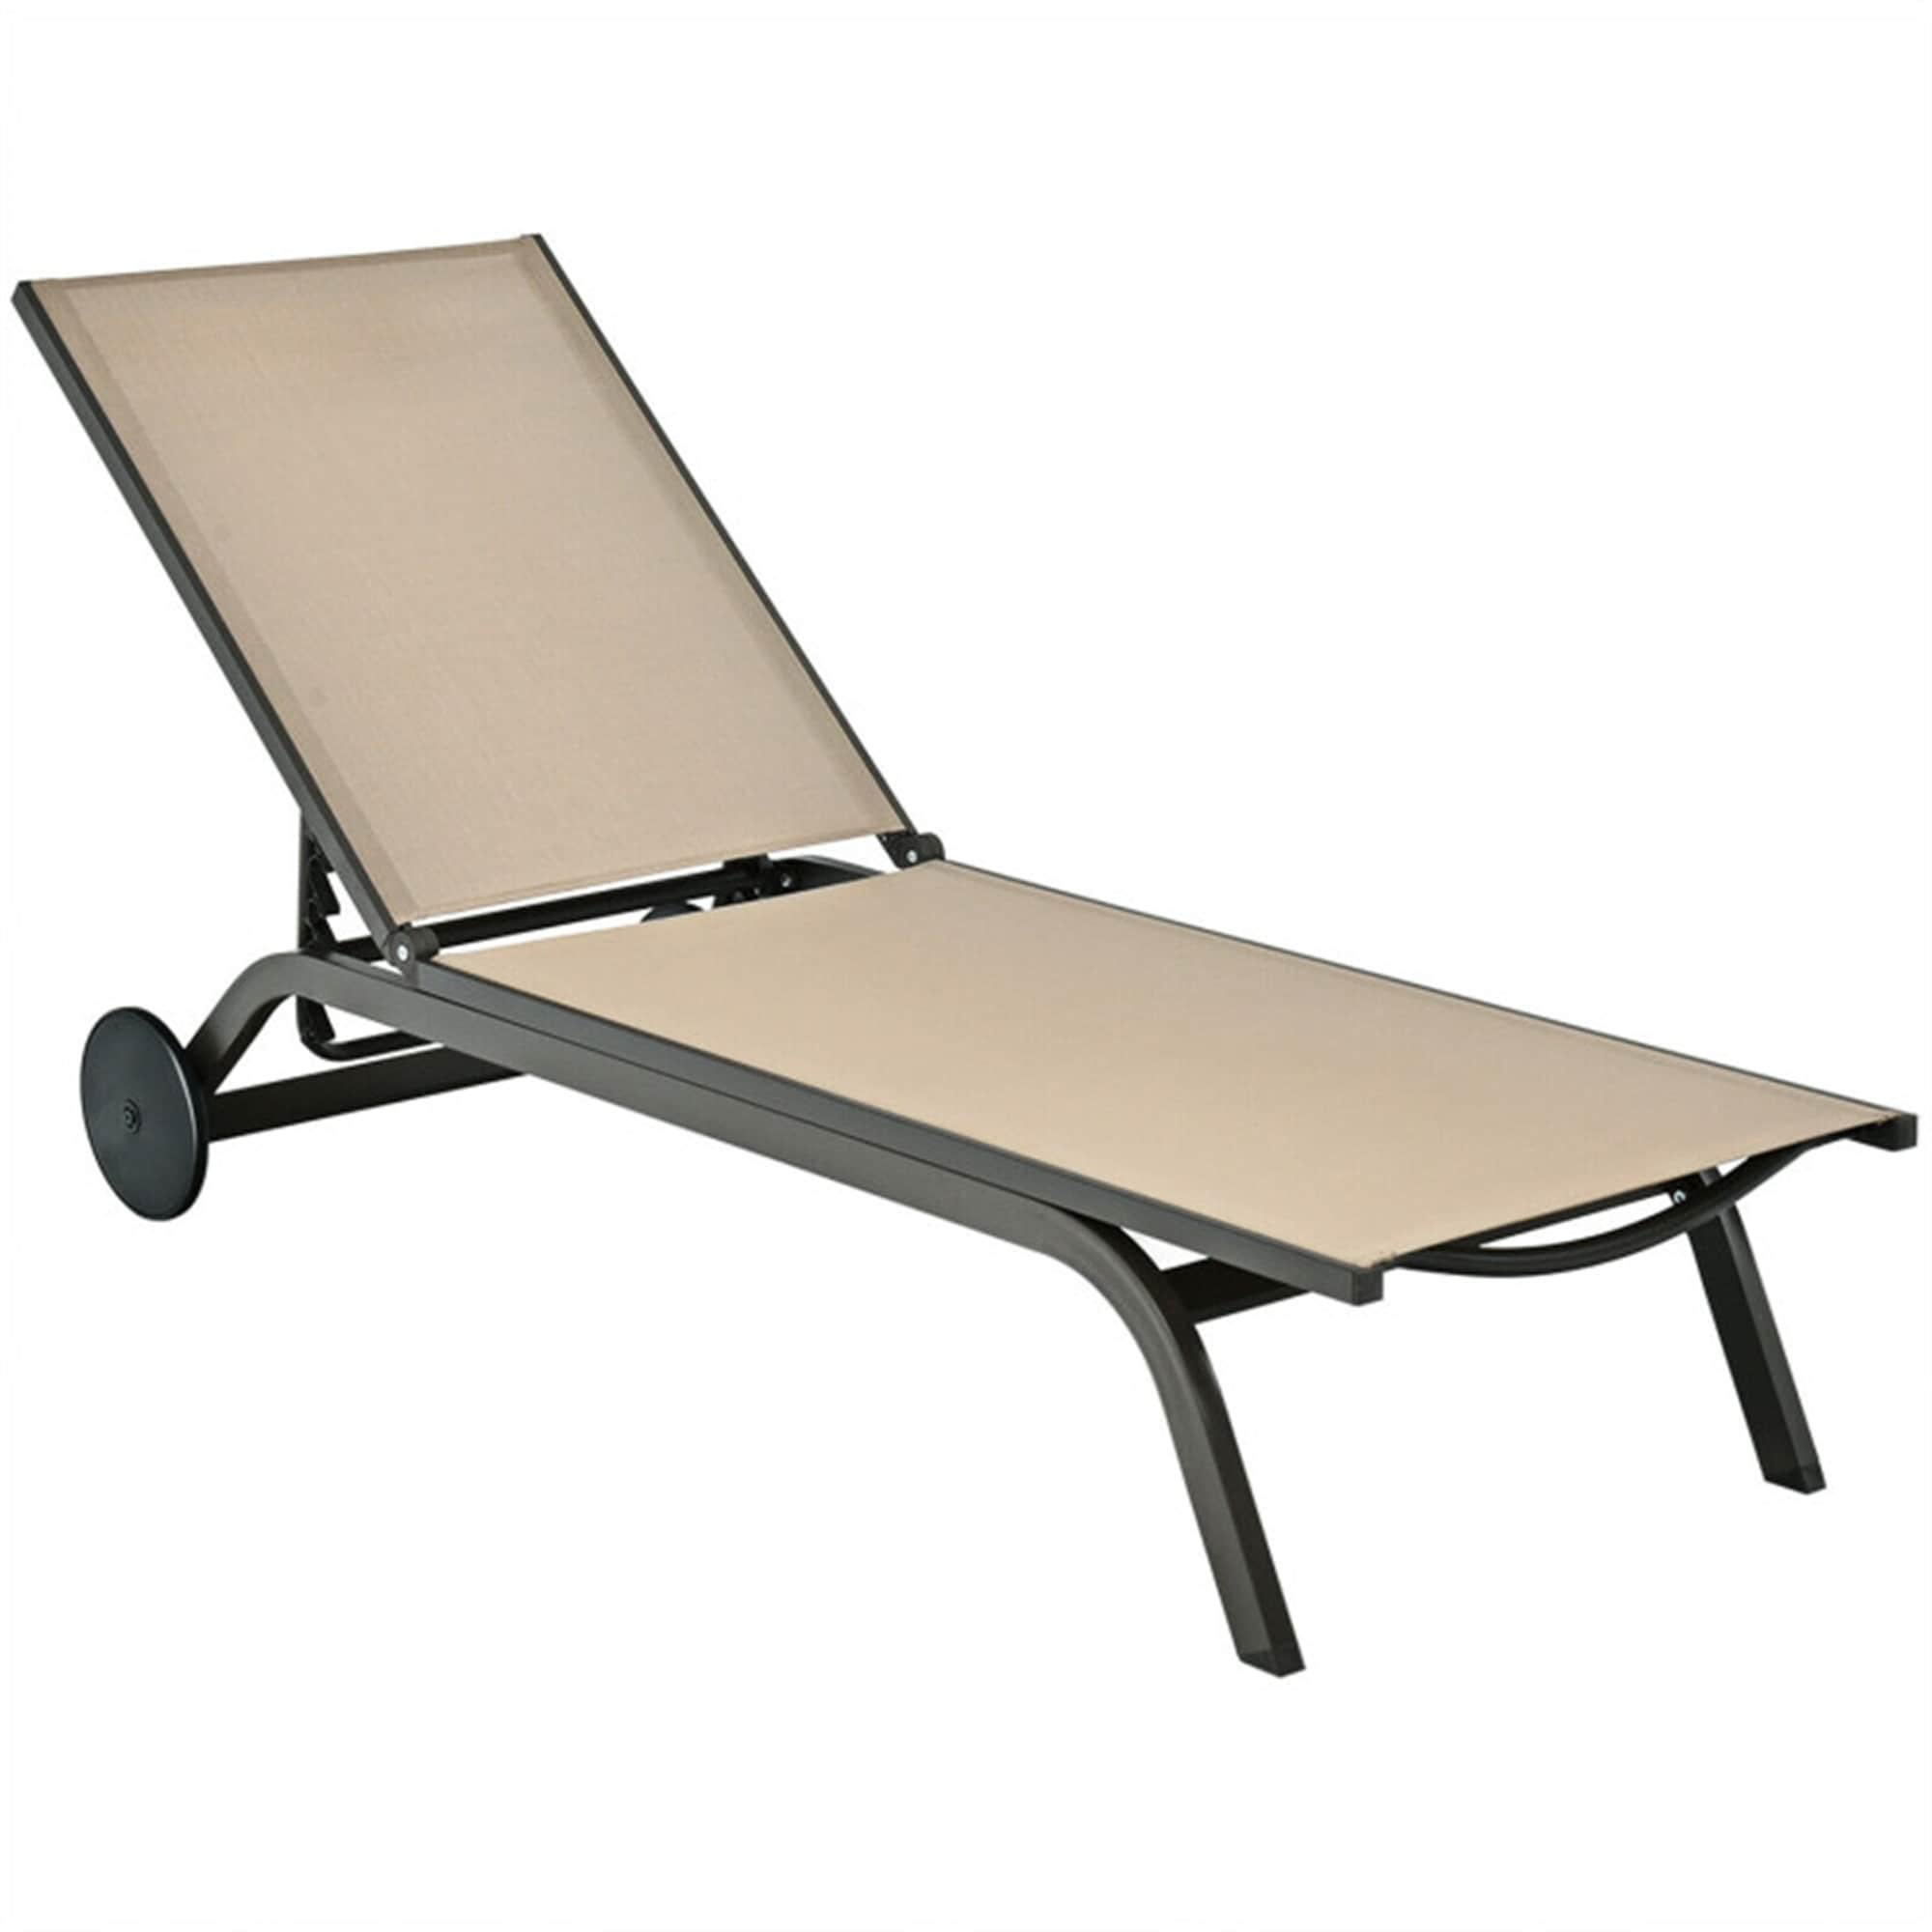 Outdoor Adjustable Reclining Aluminum Fabric Patio Lounge Chair